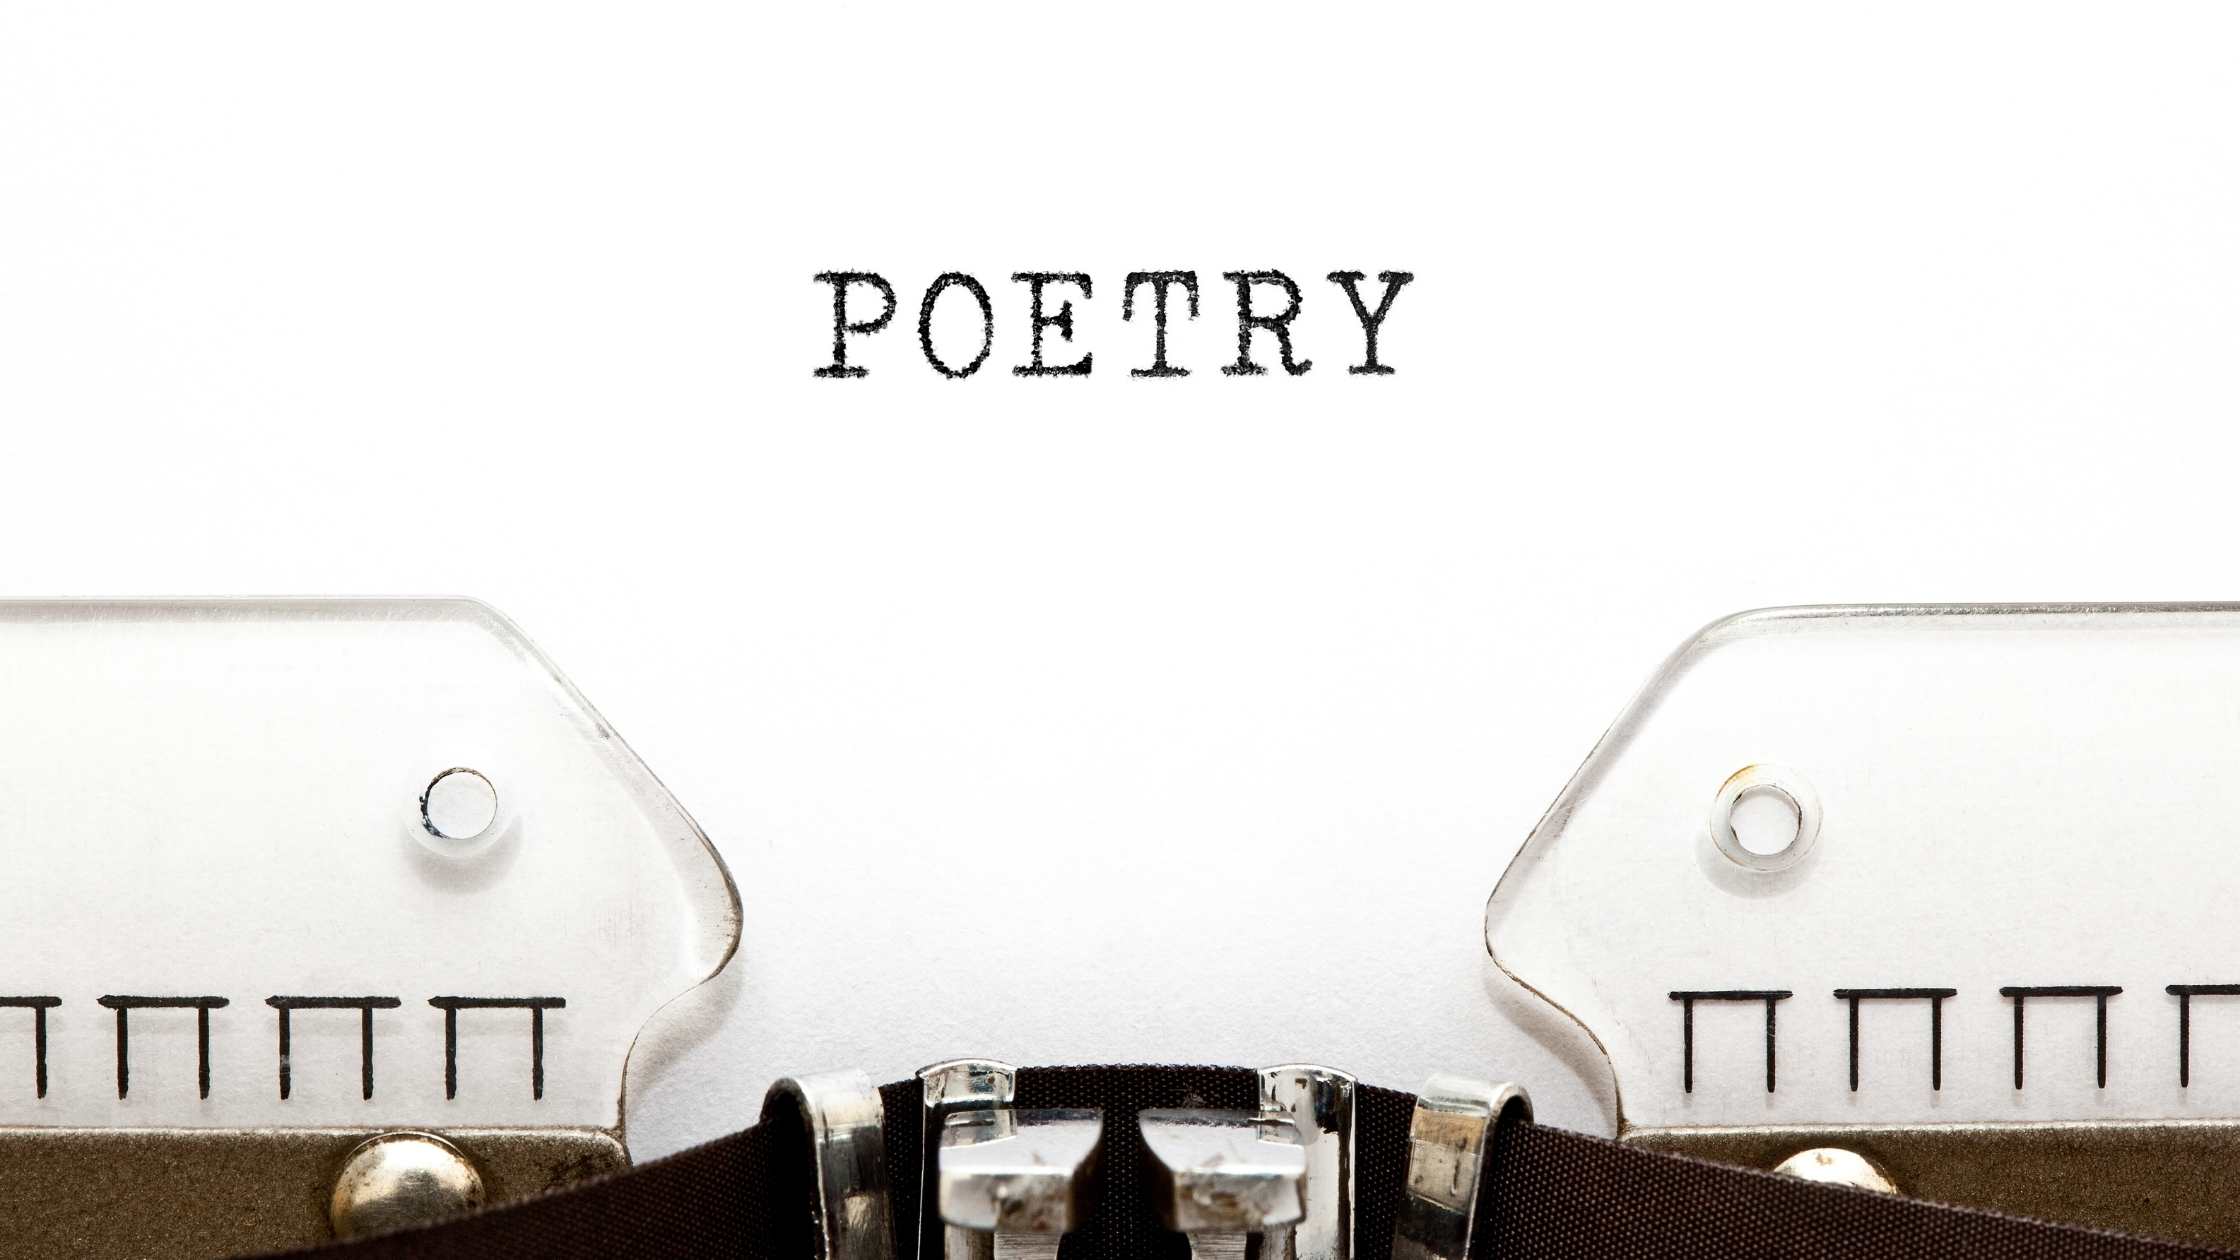 What makes Spoken Word Poetry so powerful?